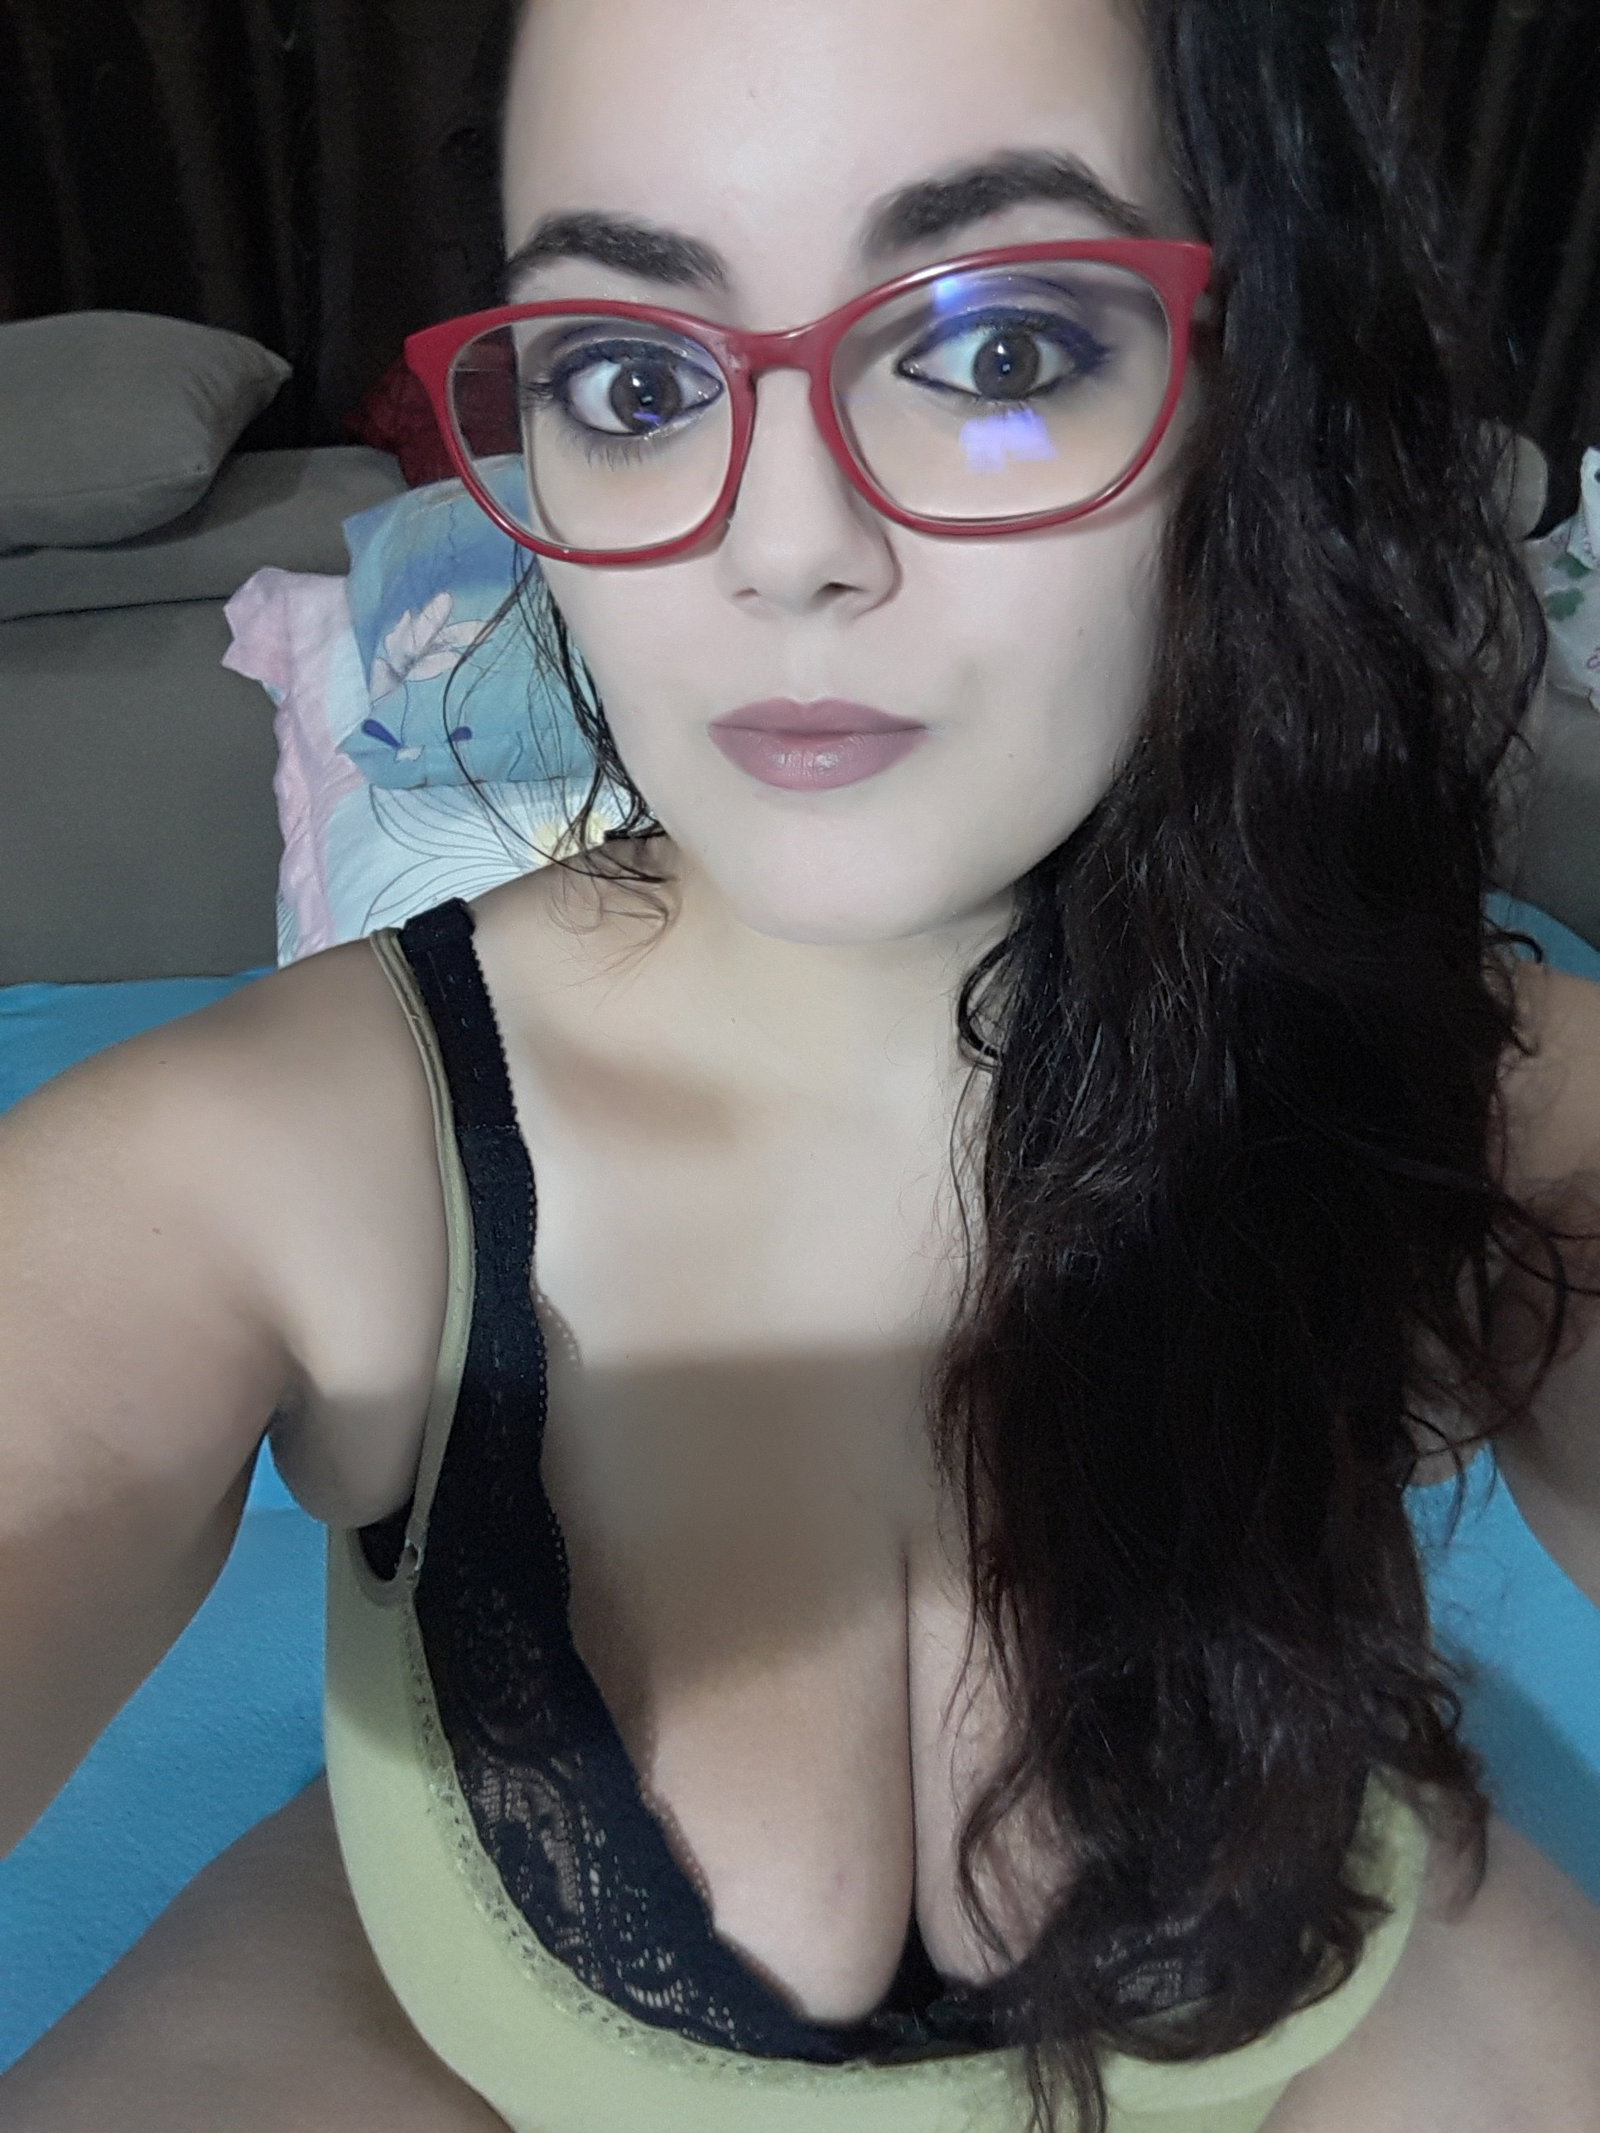 Watch the Photo by BustyVonKat with the username @BustyVonKat, who is a star user, posted on January 23, 2019 and the text says 'Join me on chaturbate.com and myfreecams'